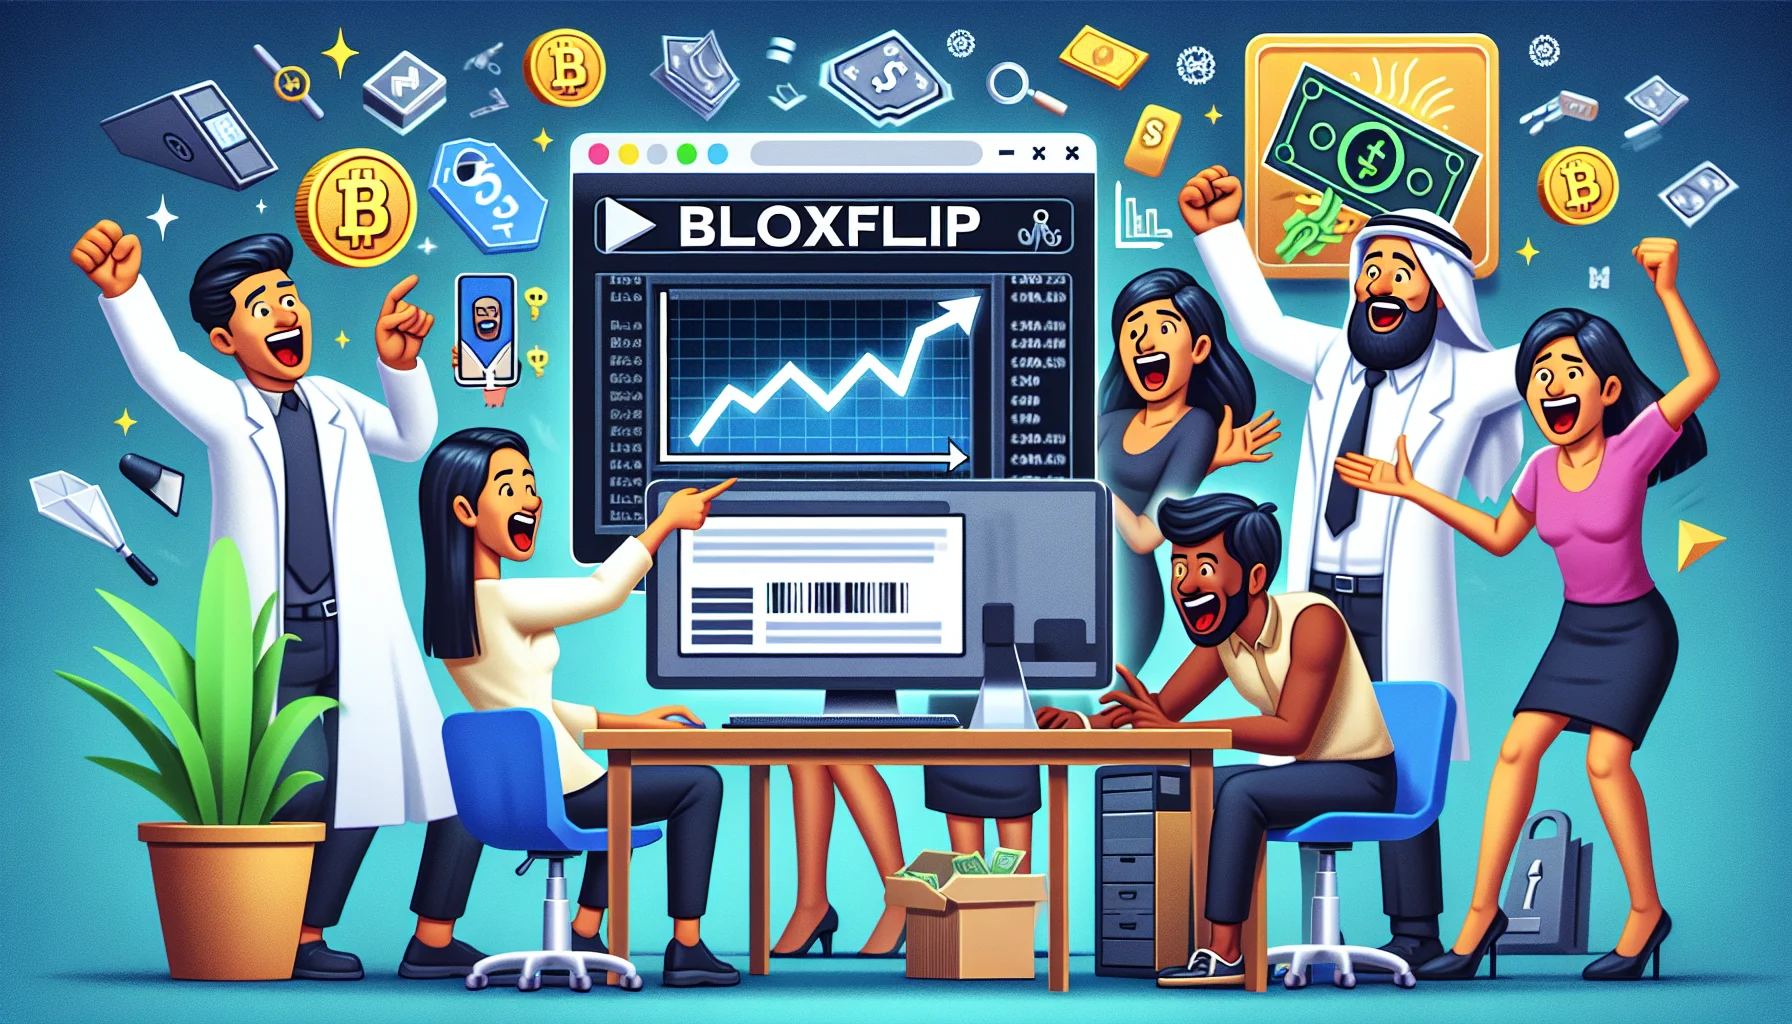 Create a humorous and realistic scene featuring the text 'bloxflip' on a computer screen, associated with an affiliate code. Depict this in a home office setting with various symbols of online wealth generation, like a graph with an upward trend, internet icons, and digital currencies. Several characters are present: a Middle-Eastern man excitedly pointing at the computer display, an Asian woman focusing diligently on the screen, and a Black woman laughing joyfully, holding her head. The atmosphere is lively, suggesting that using this code can lead to prosperous outcomes in online ventures.